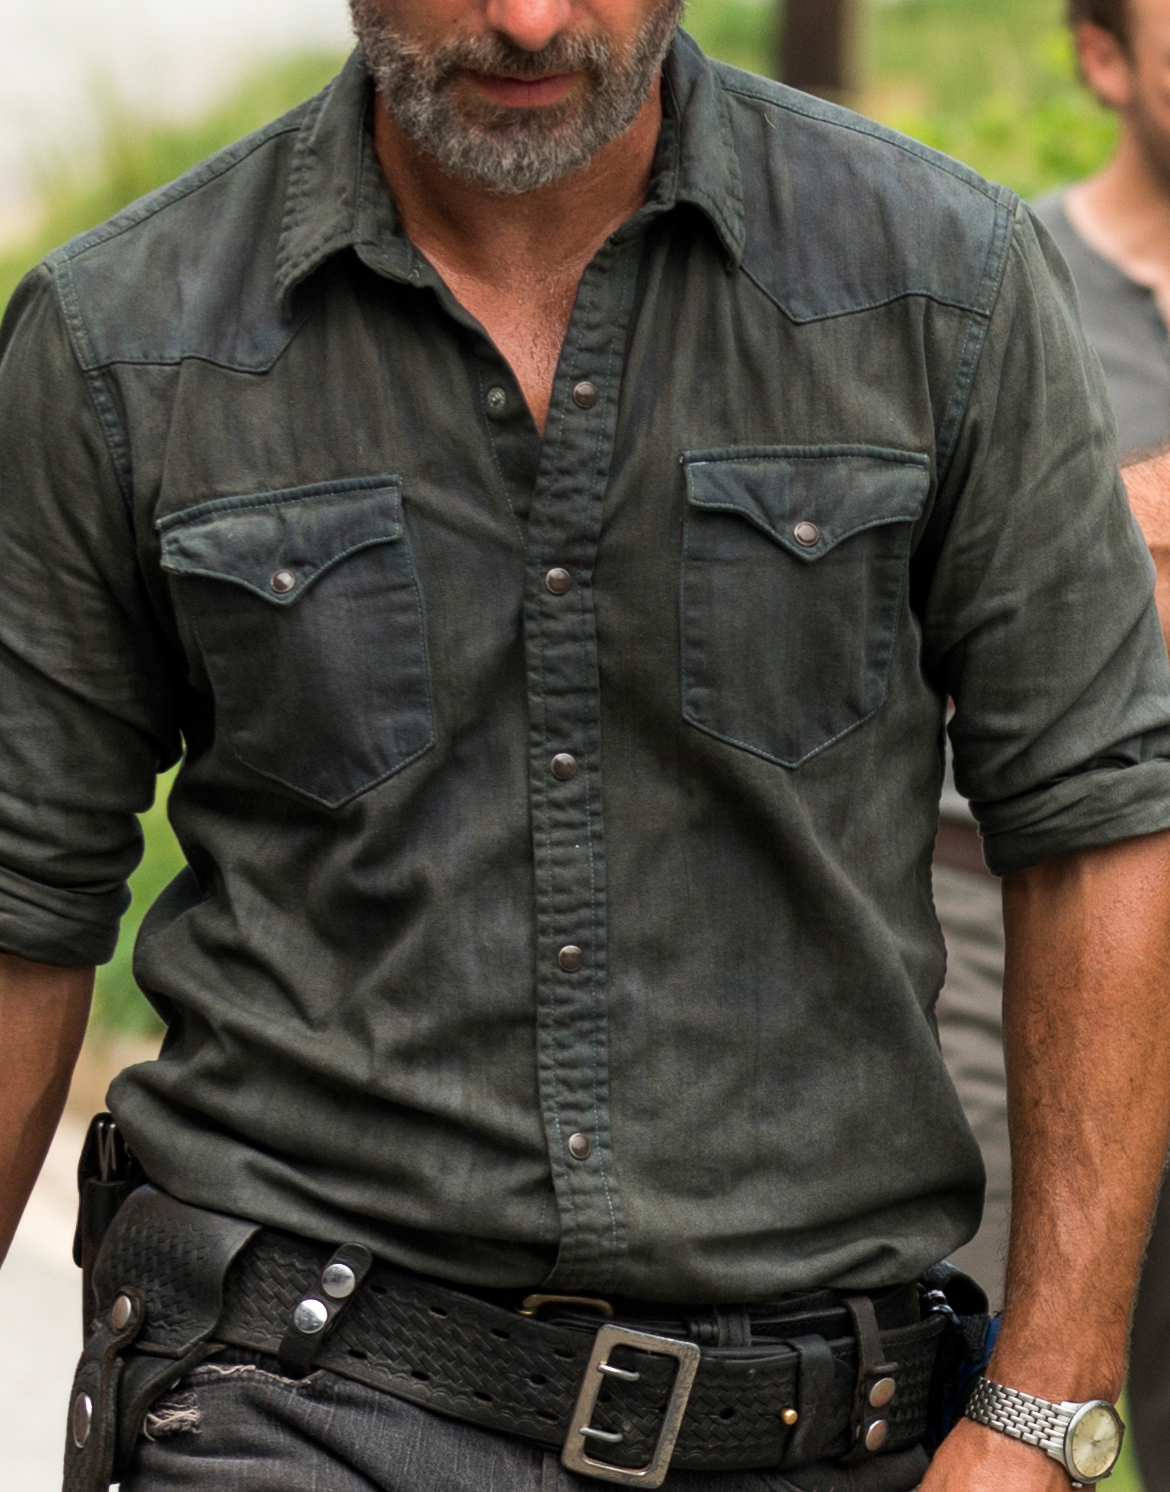 Rick Grimes screen accurate costume, Page 3